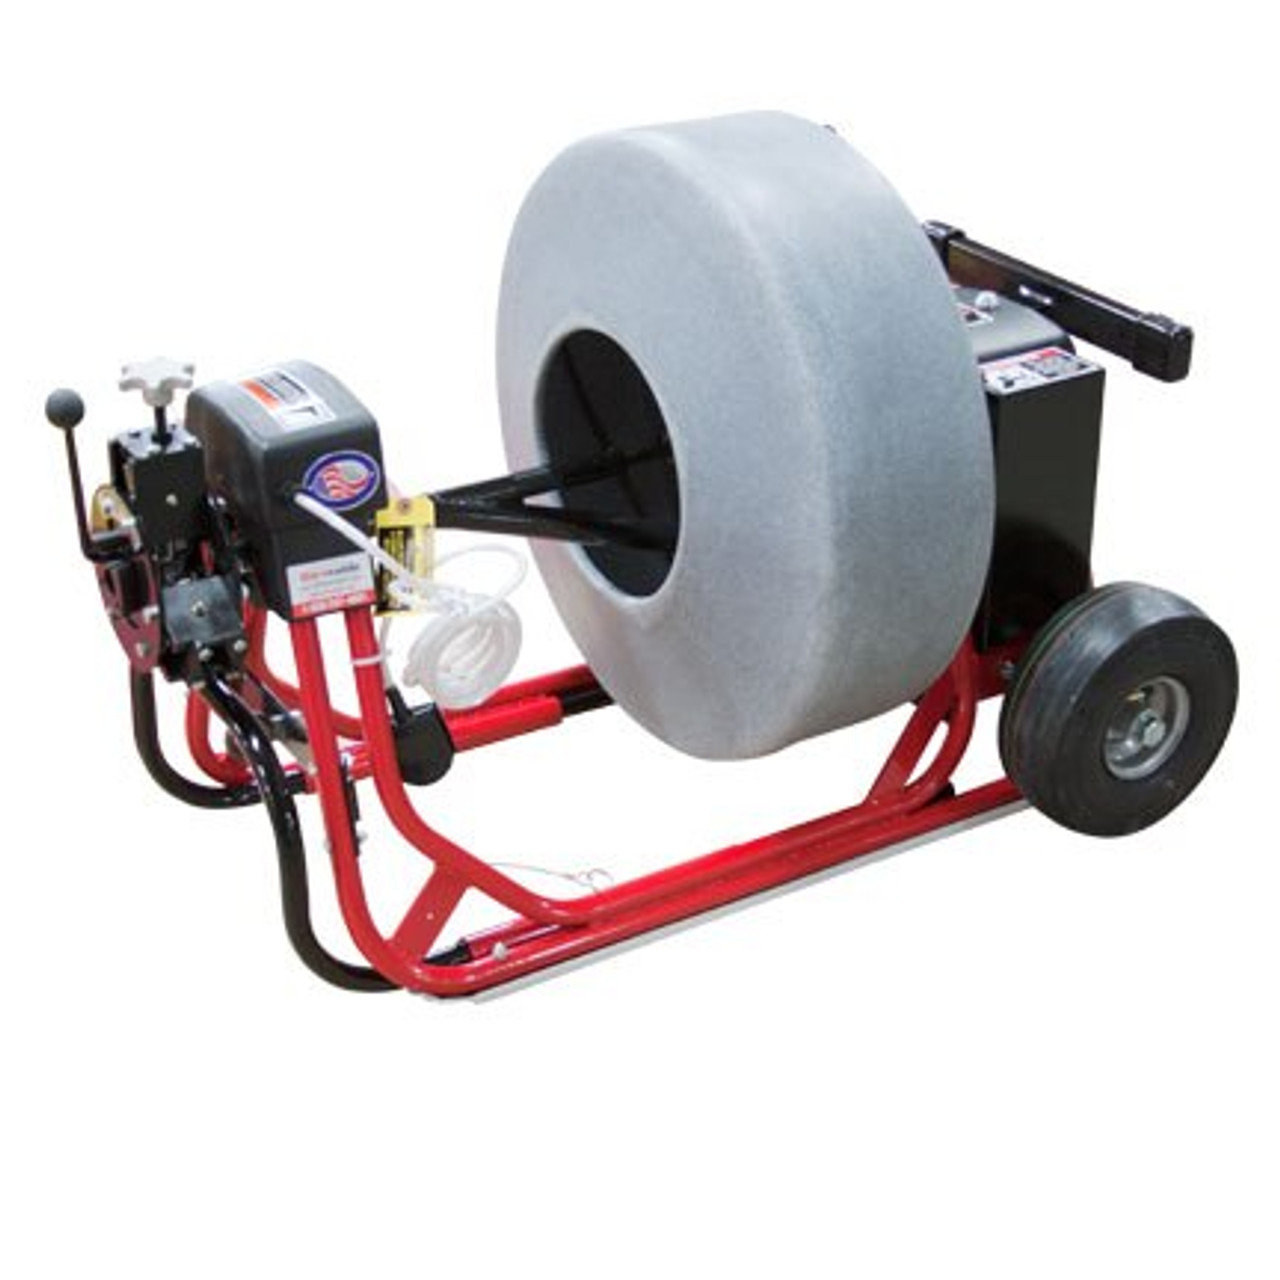 DM150A Pivot Drain Cleaning Machine With Polyethylene Reel & Cable